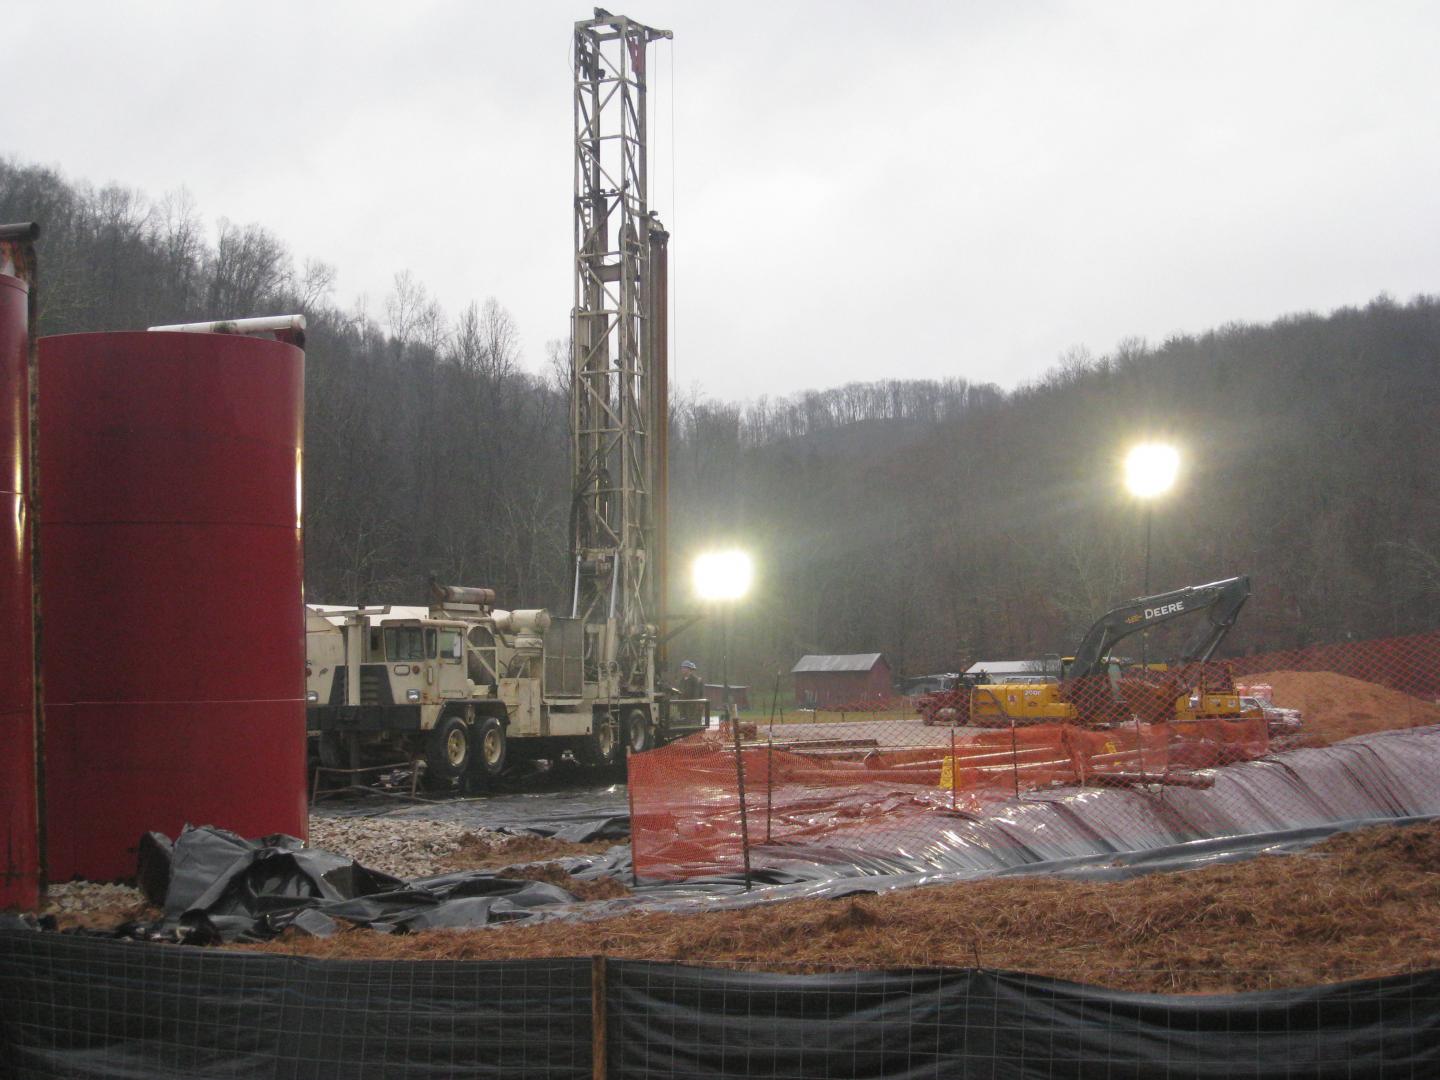 Spill Site in West Virginia